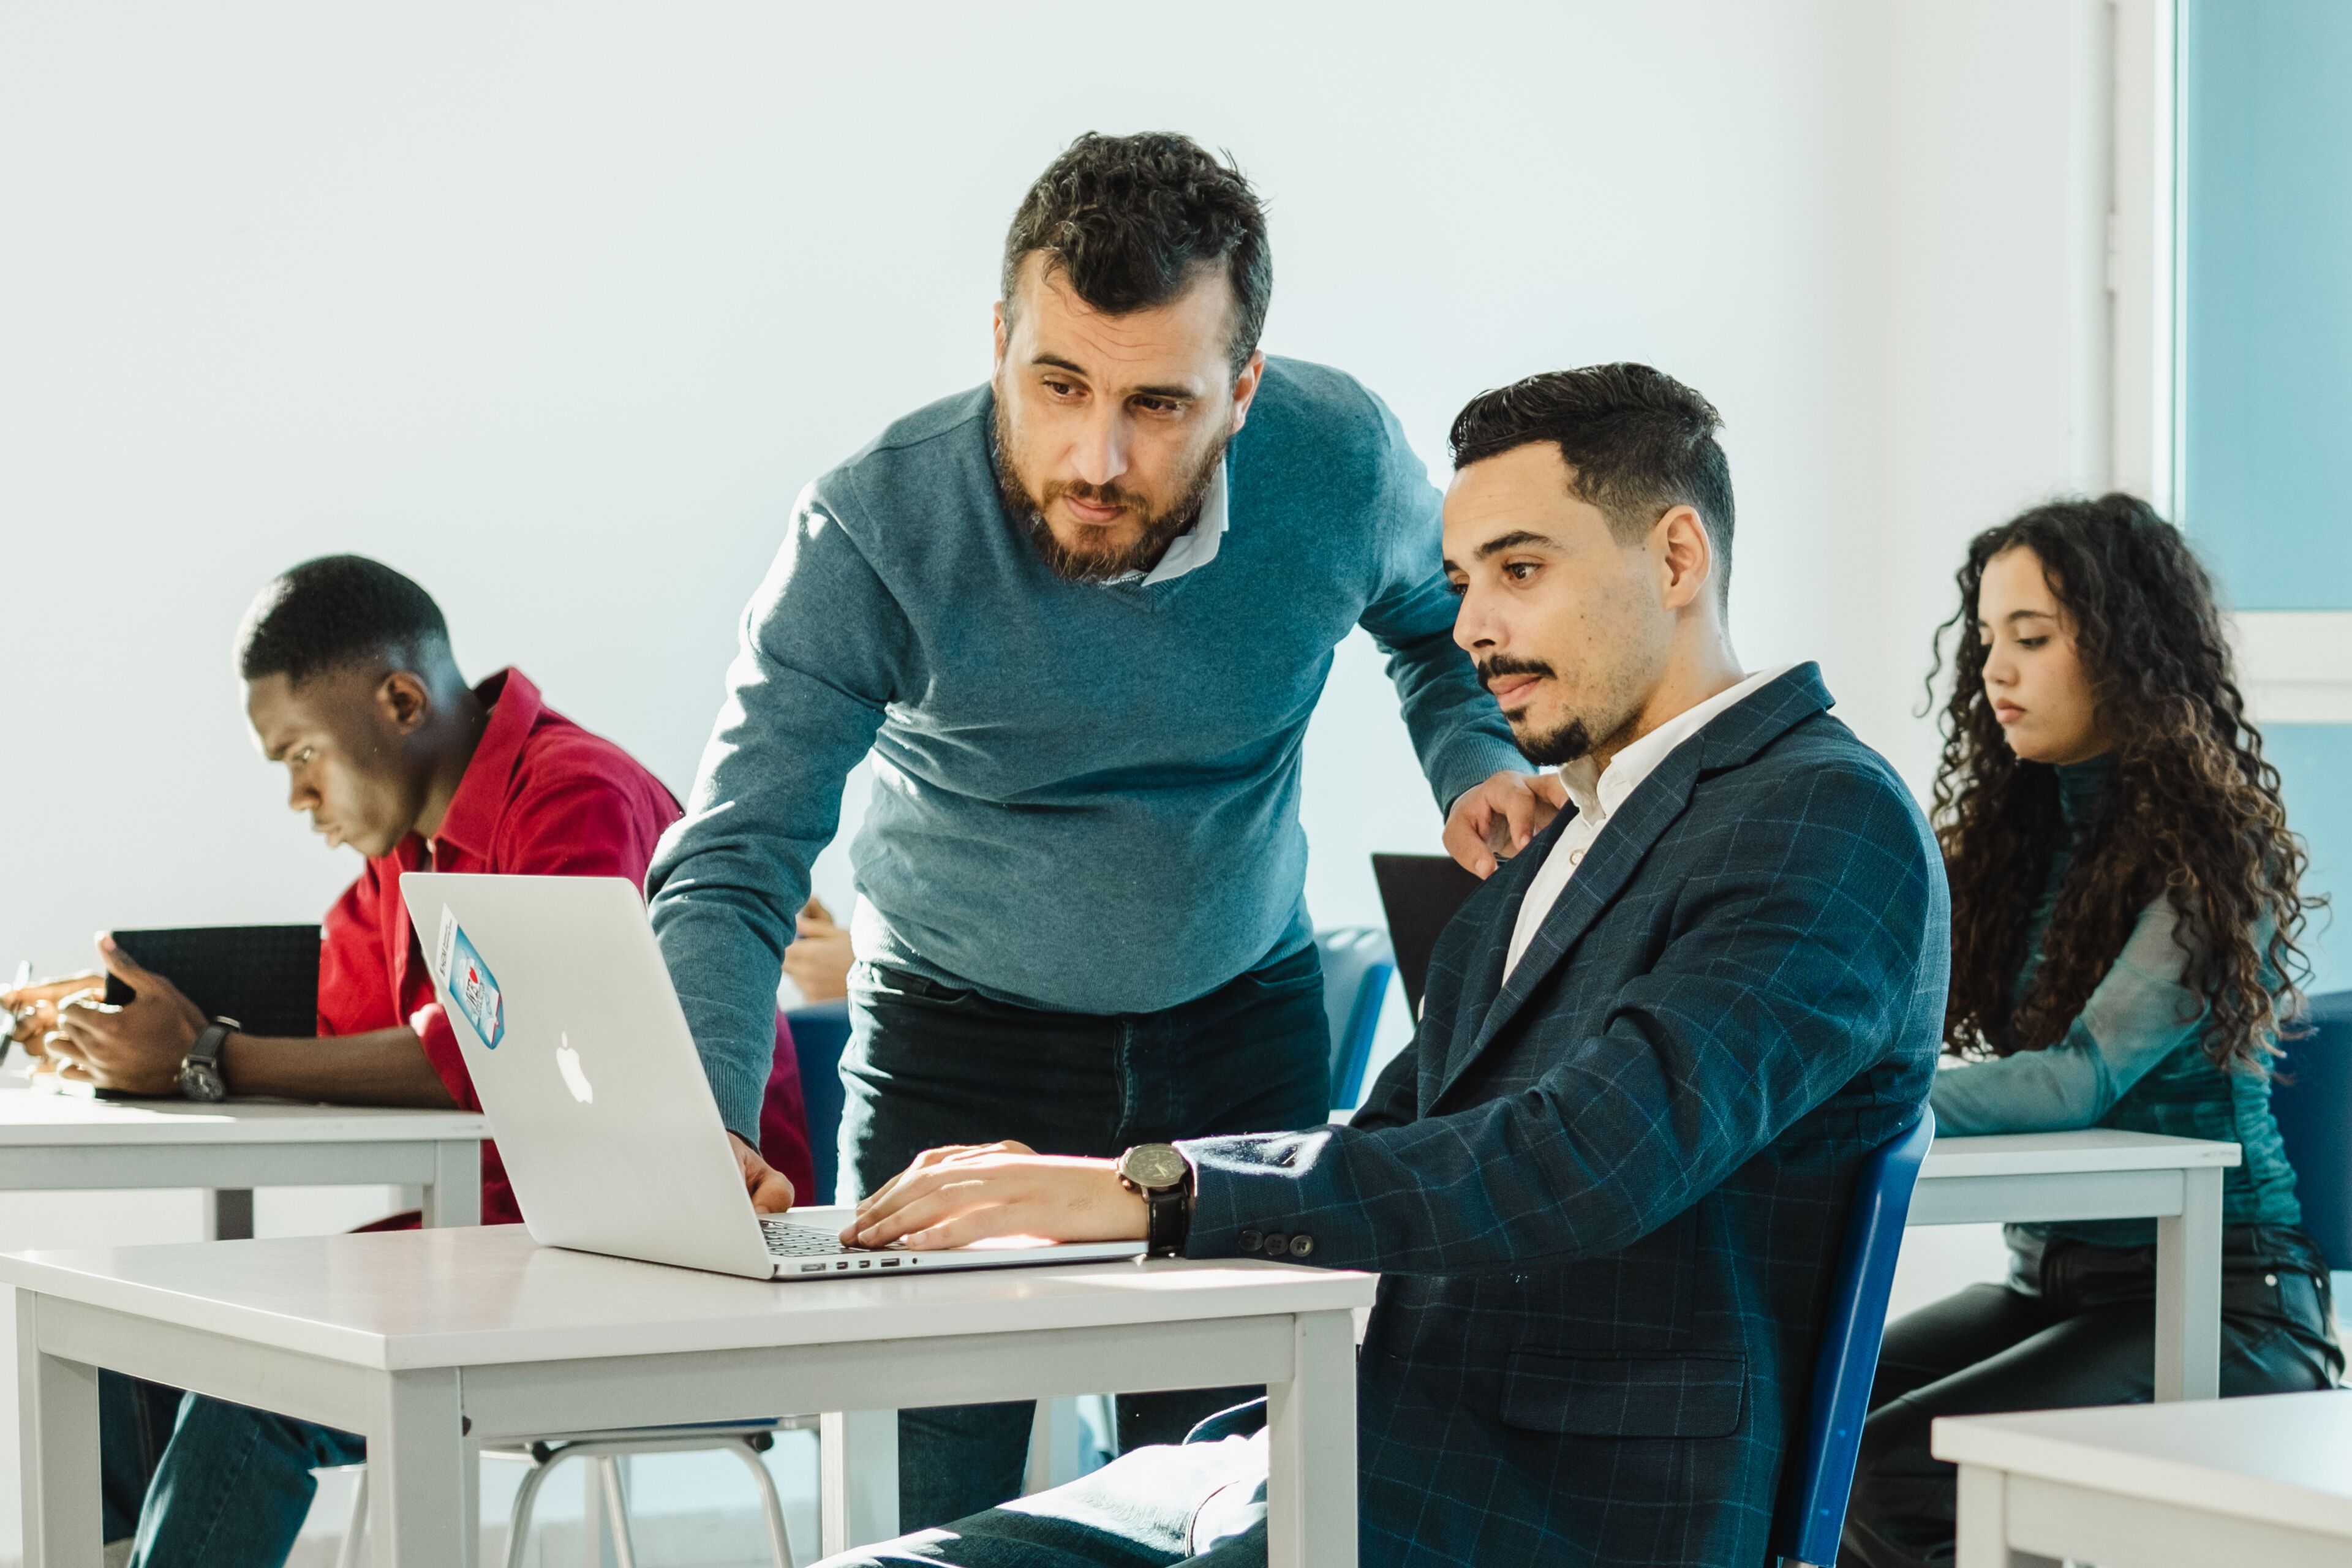 A business instructor guiding an employee on a laptop, with focused colleagues in the background.